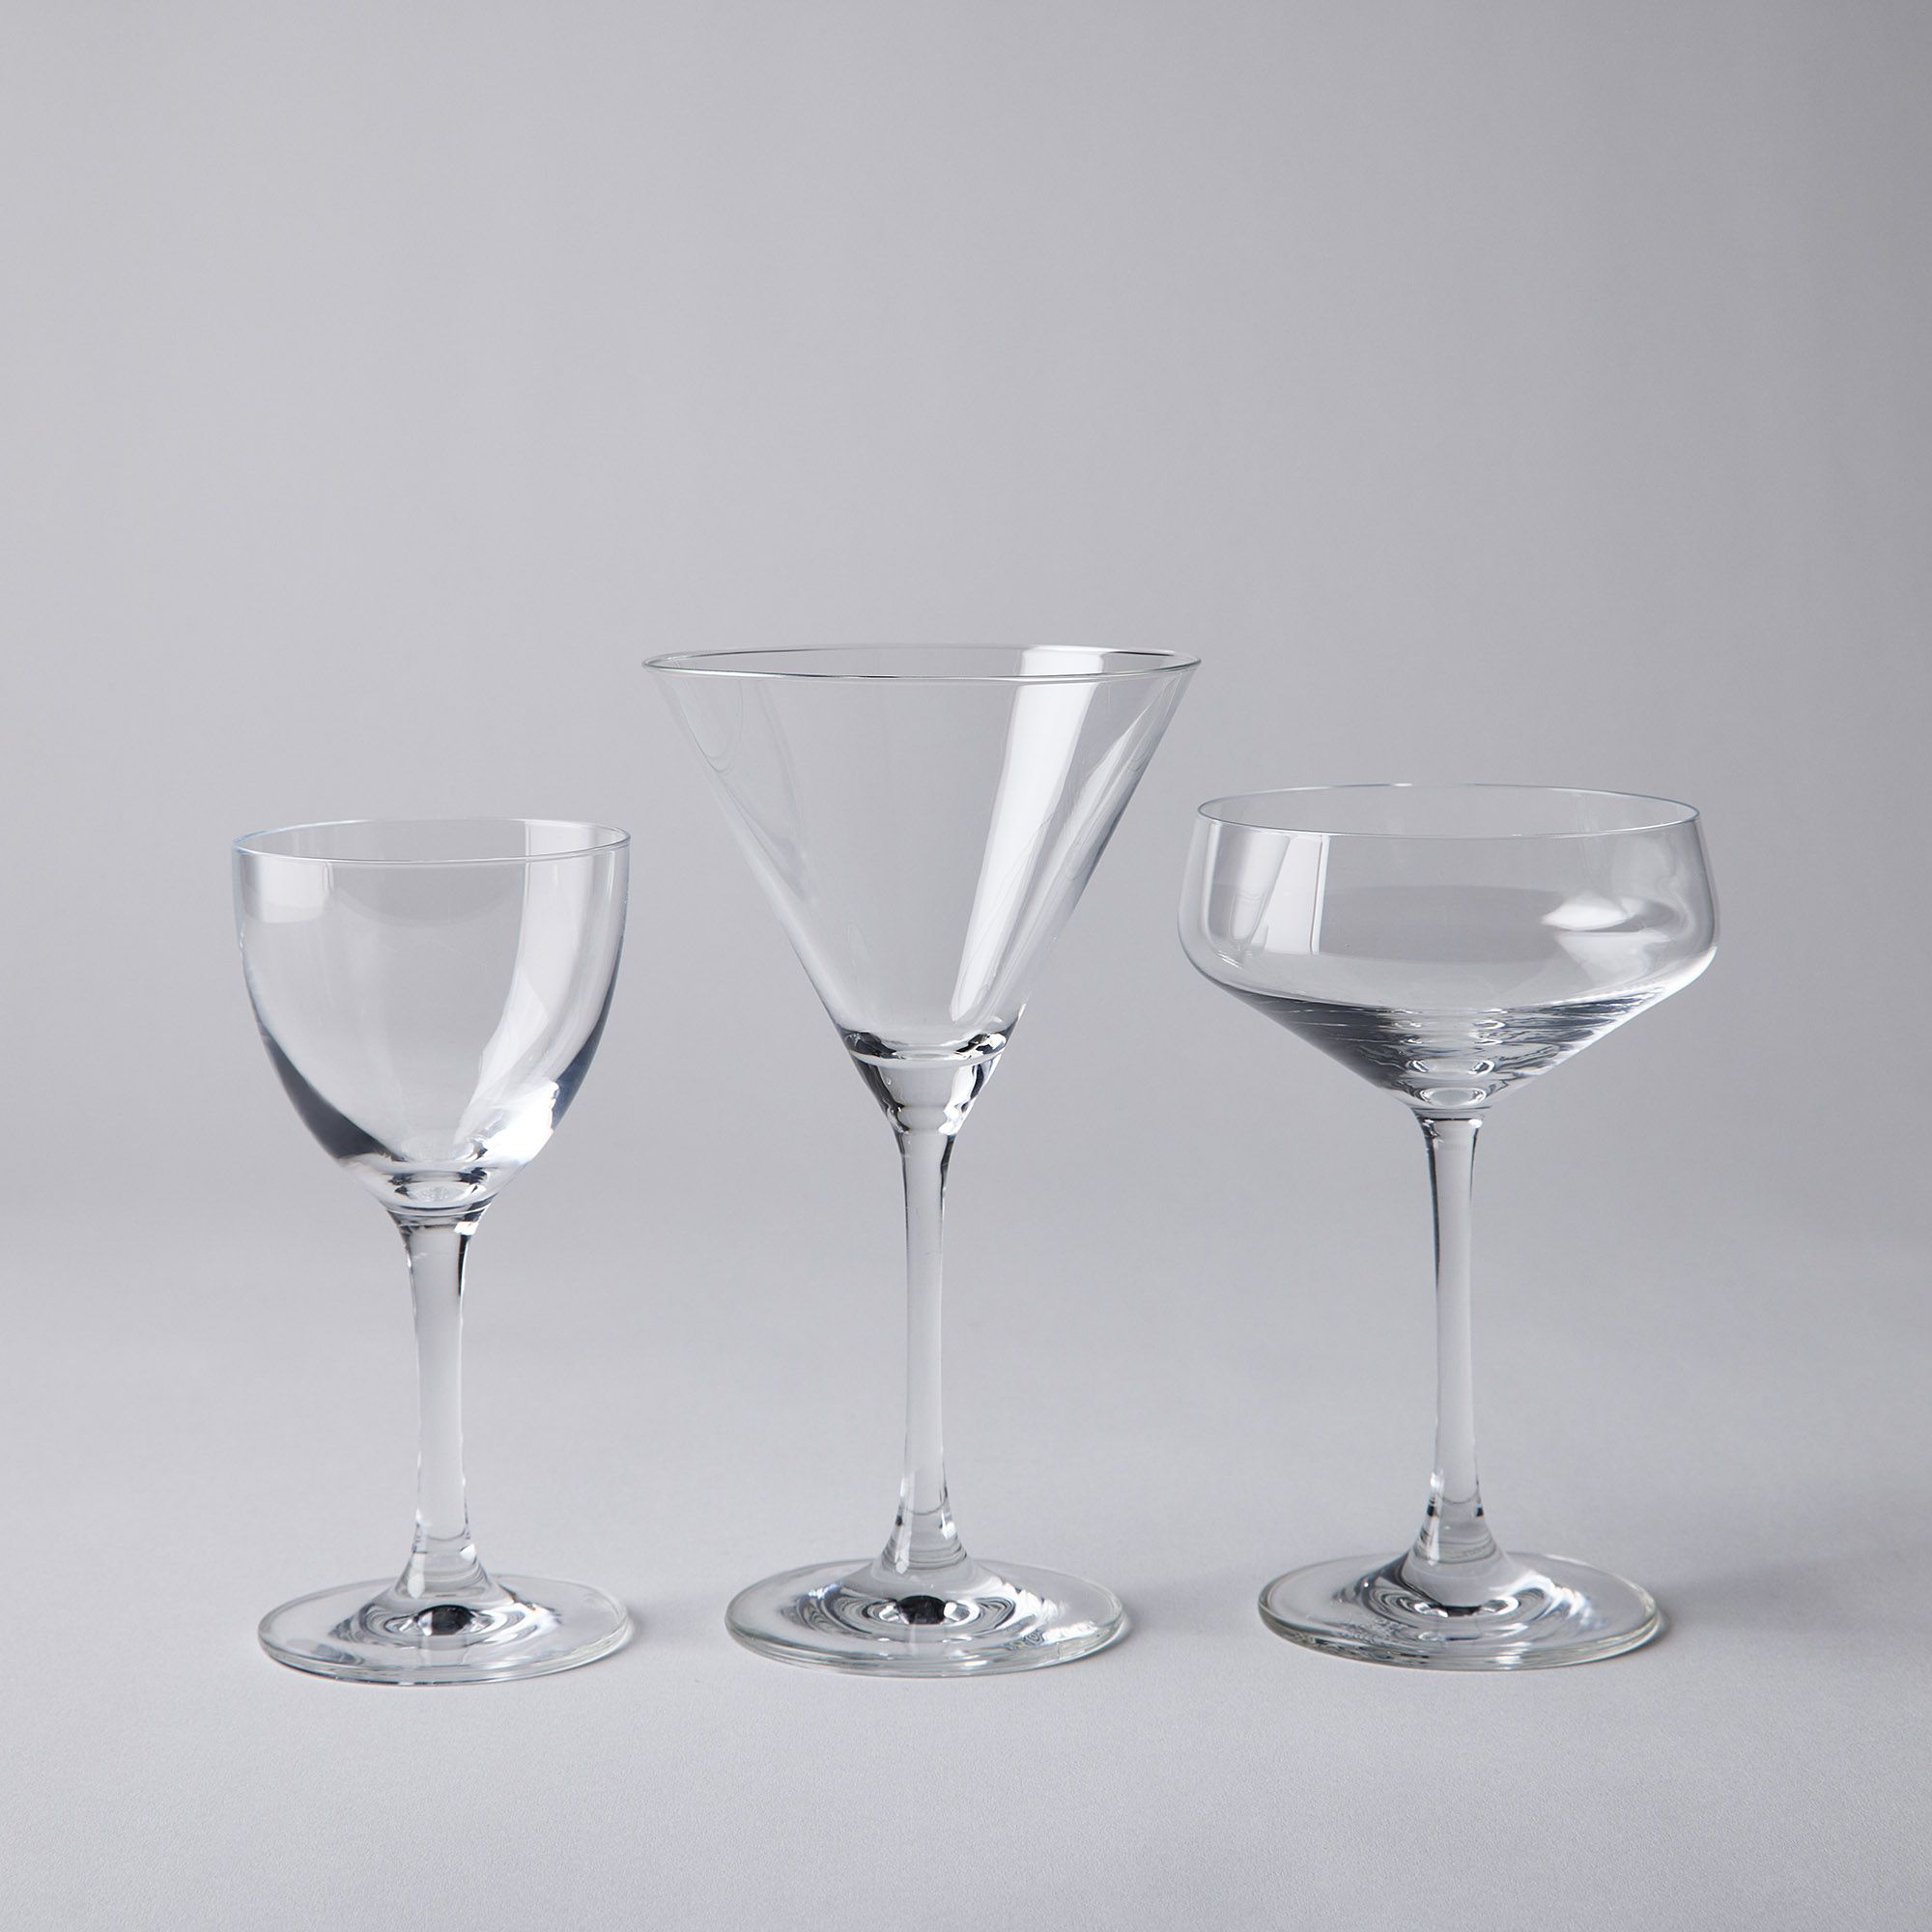 Schott Zwiesel Complete Bar Food52 12-Piece Cocktail Glasses Set, Exclusive on Classic